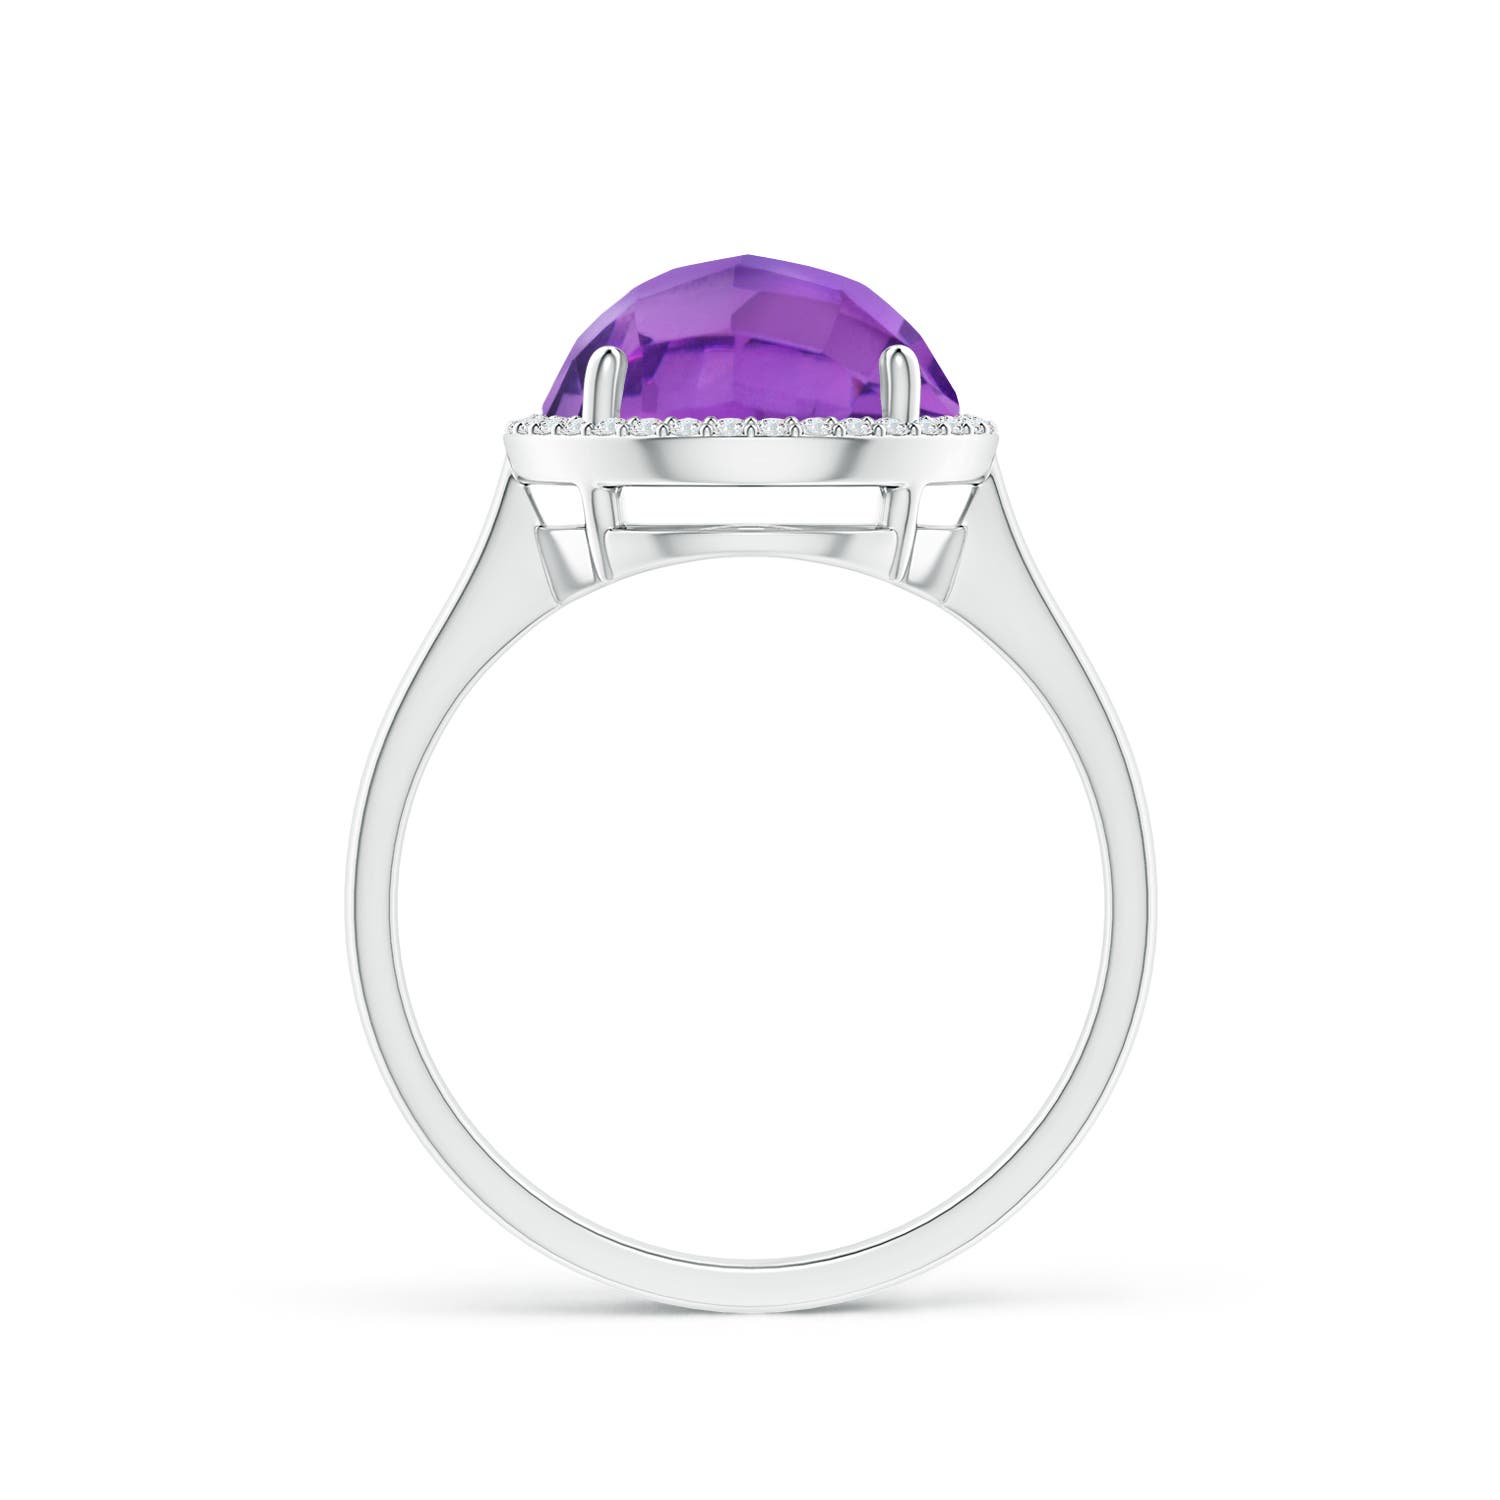 AA - Amethyst / 3.77 CT / 14 KT White Gold